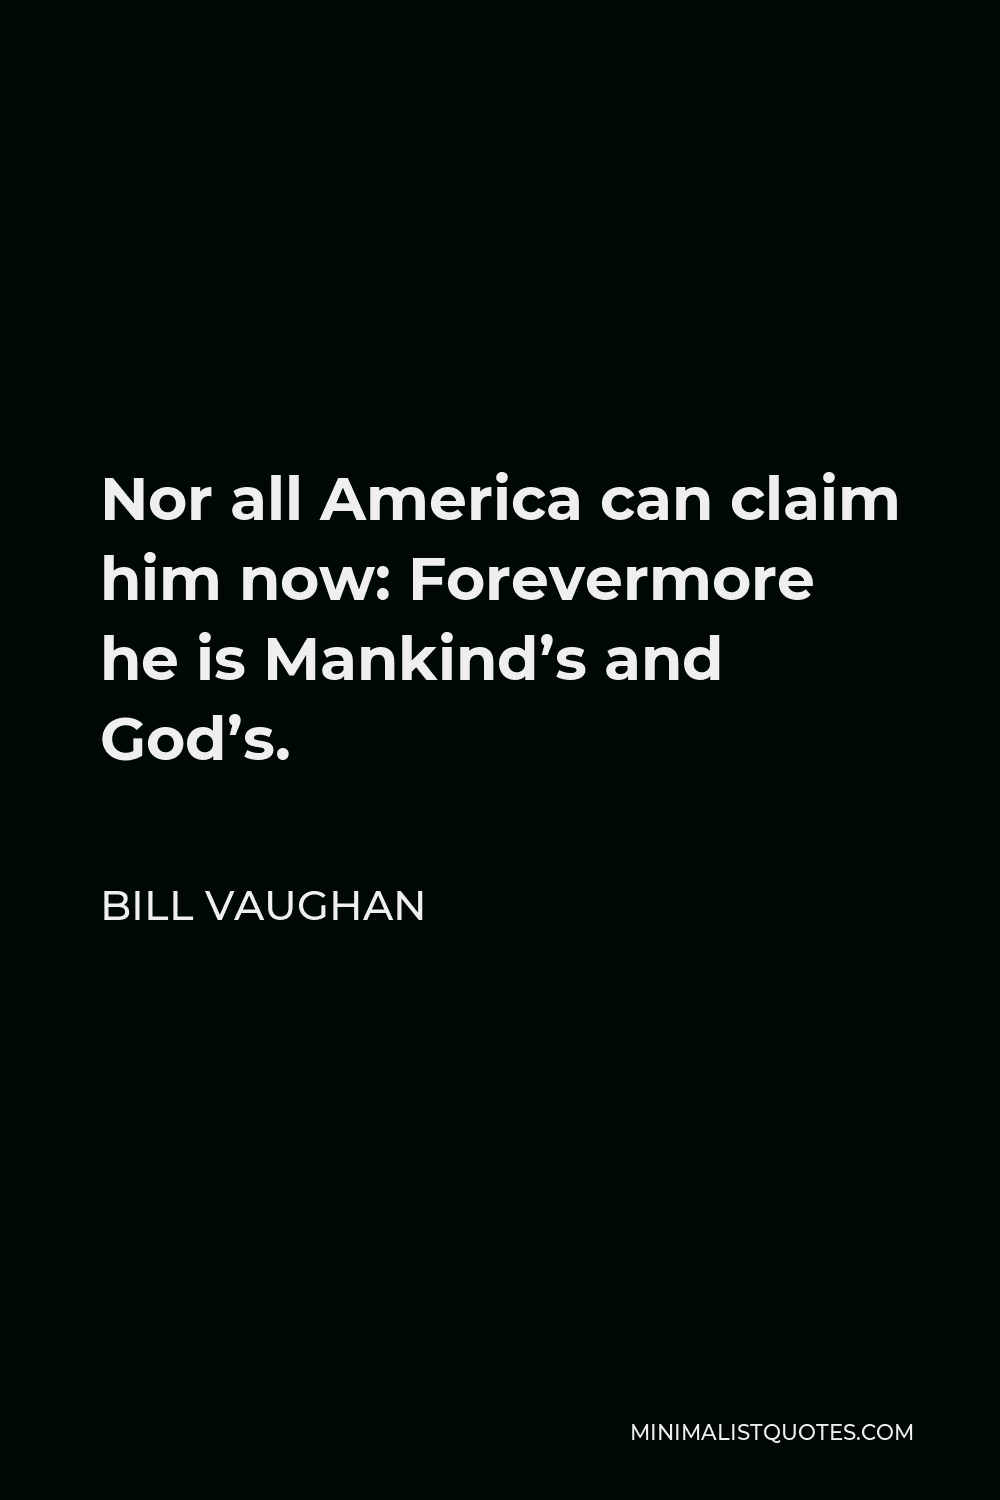 Bill Vaughan Quote - Nor all America can claim him now: Forevermore he is Mankind’s and God’s.